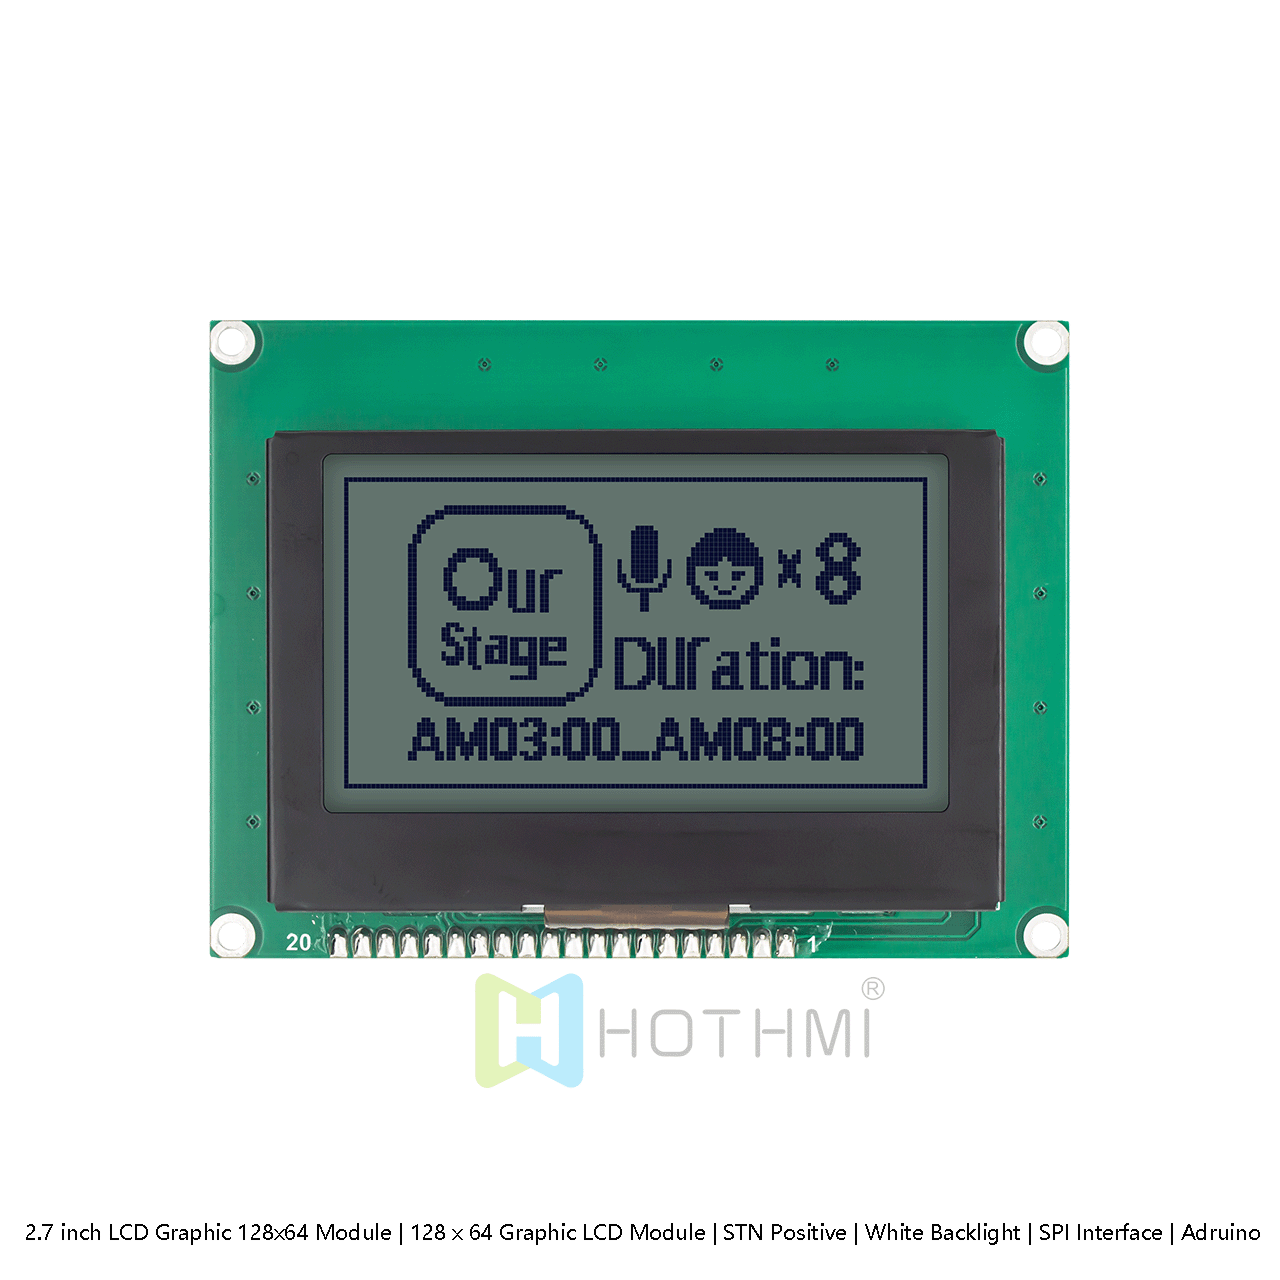 2.7 inch Graphic LCD 128x64 Module | 128 x 64 Graphic LCD | STN Positive | Yellow-green Backlight | SPI Interface